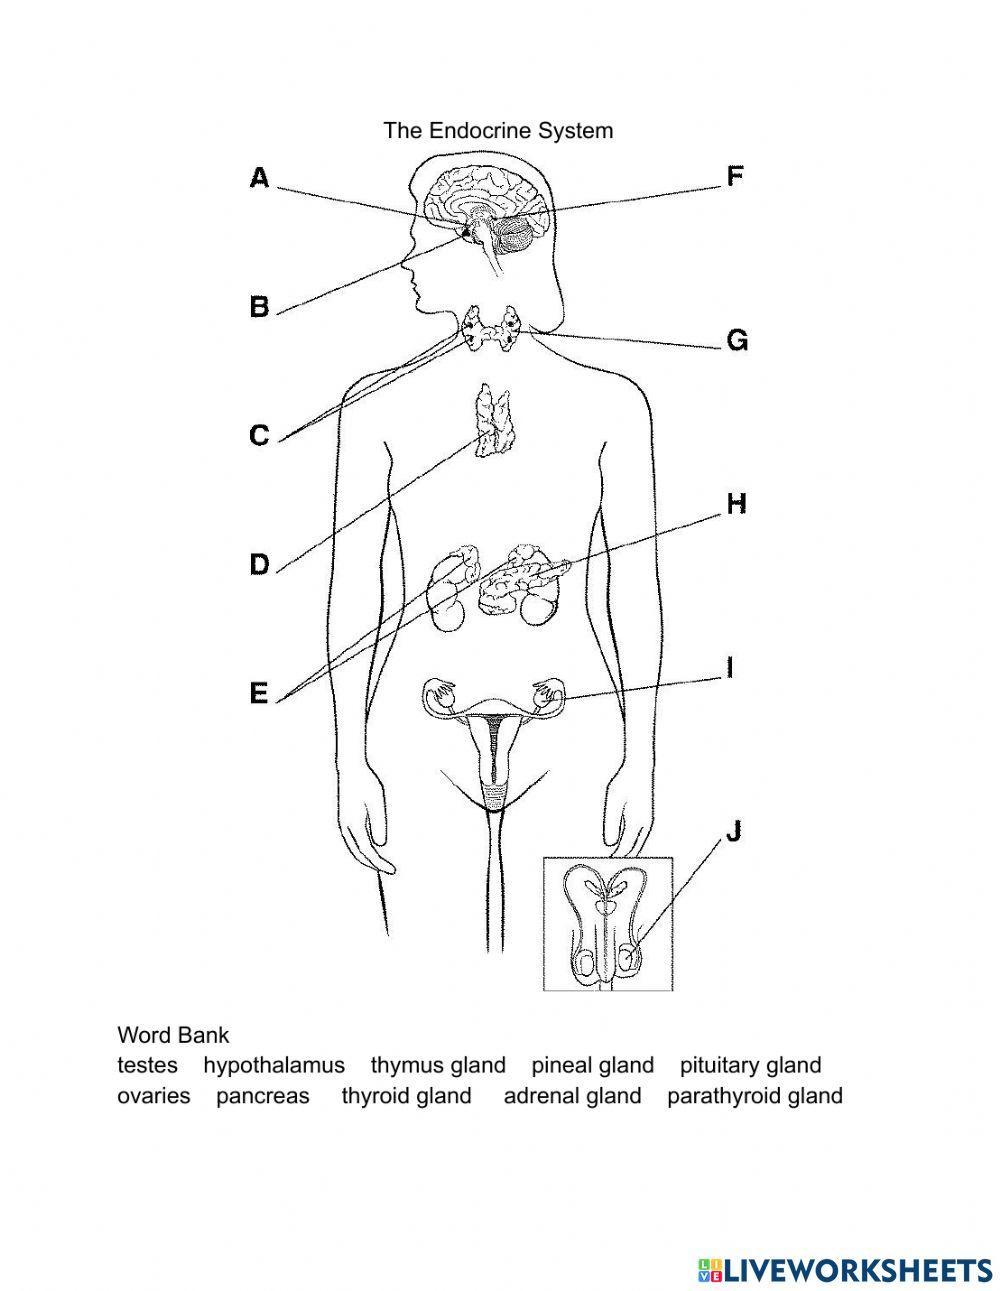 The Endocrine System Interactive Worksheet